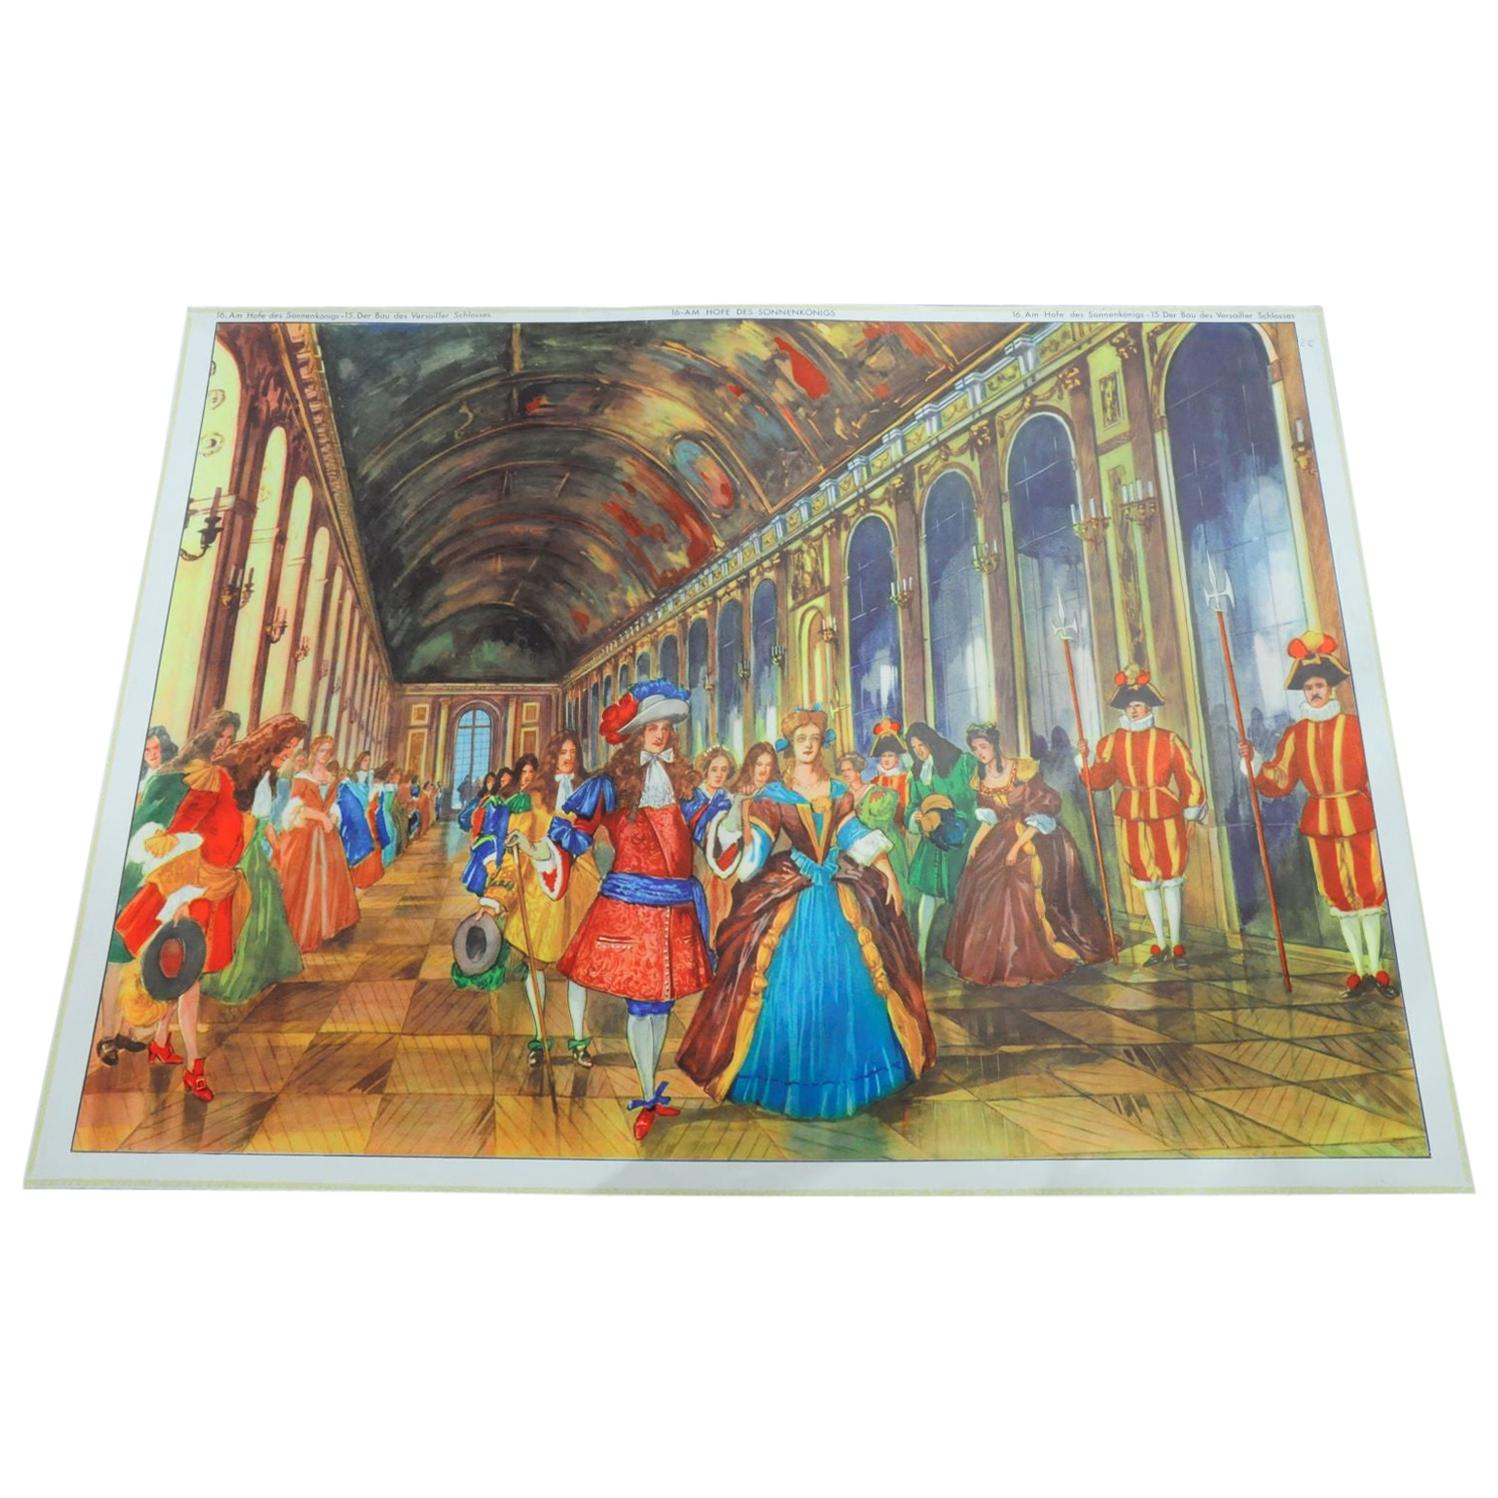 Vintage Double-Sided Wall Chart Build of Versailles Palace Life of Sun King